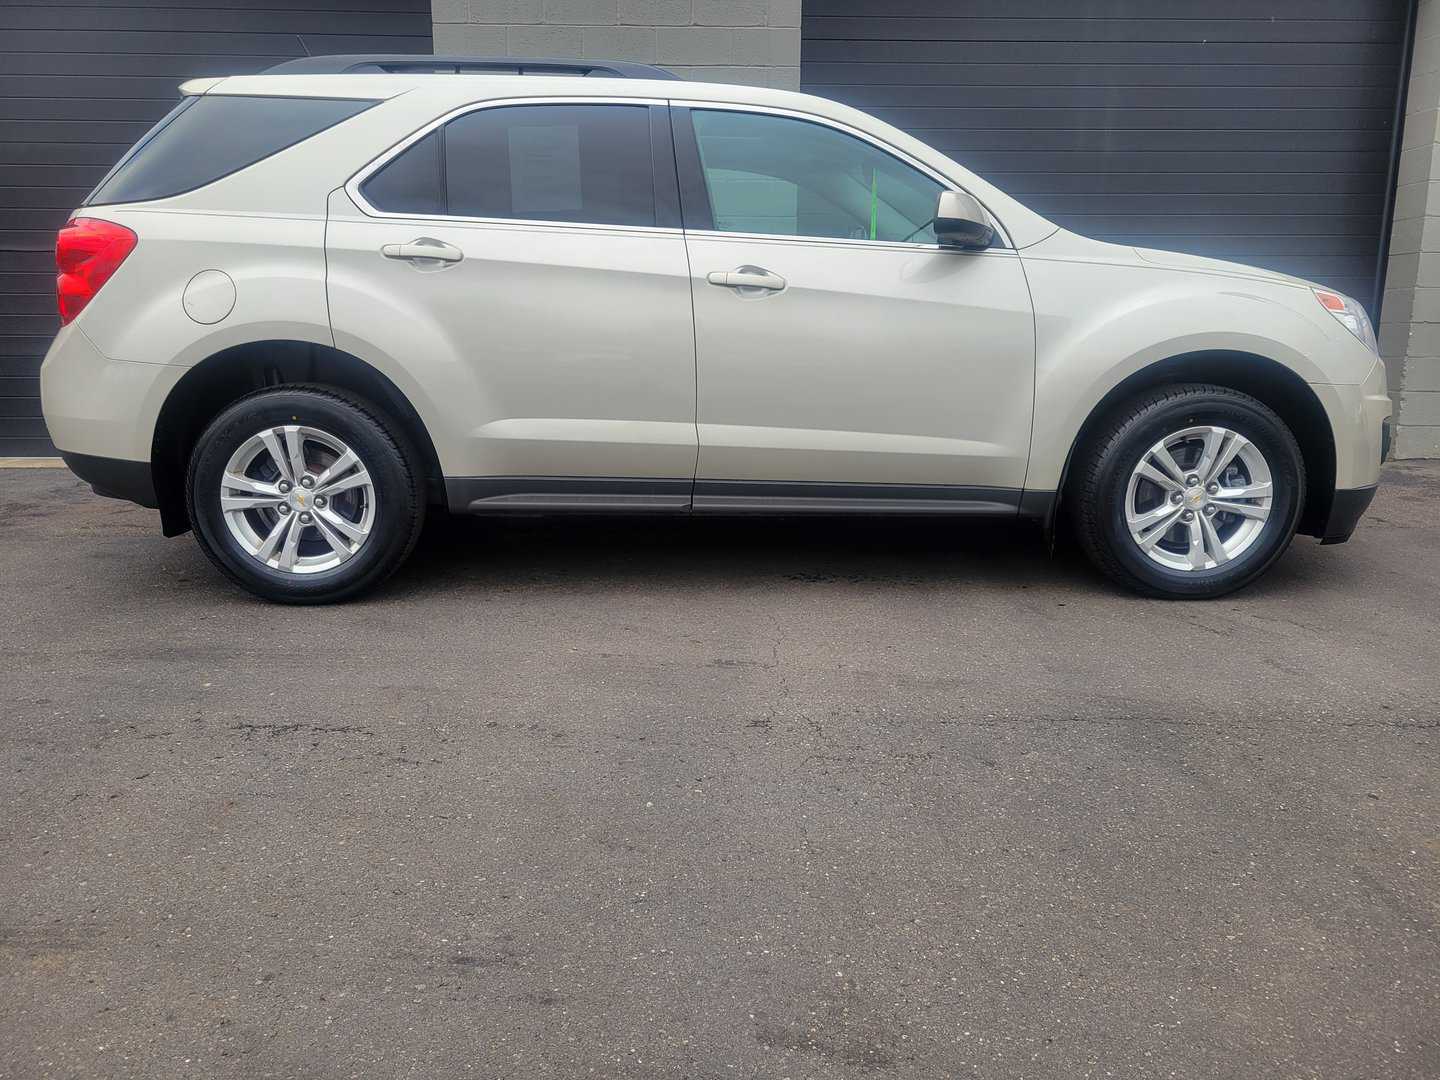 2013 Chevrolet Equinox Lt Is A Stylish And Reliable Vehicle From Chevrolet.